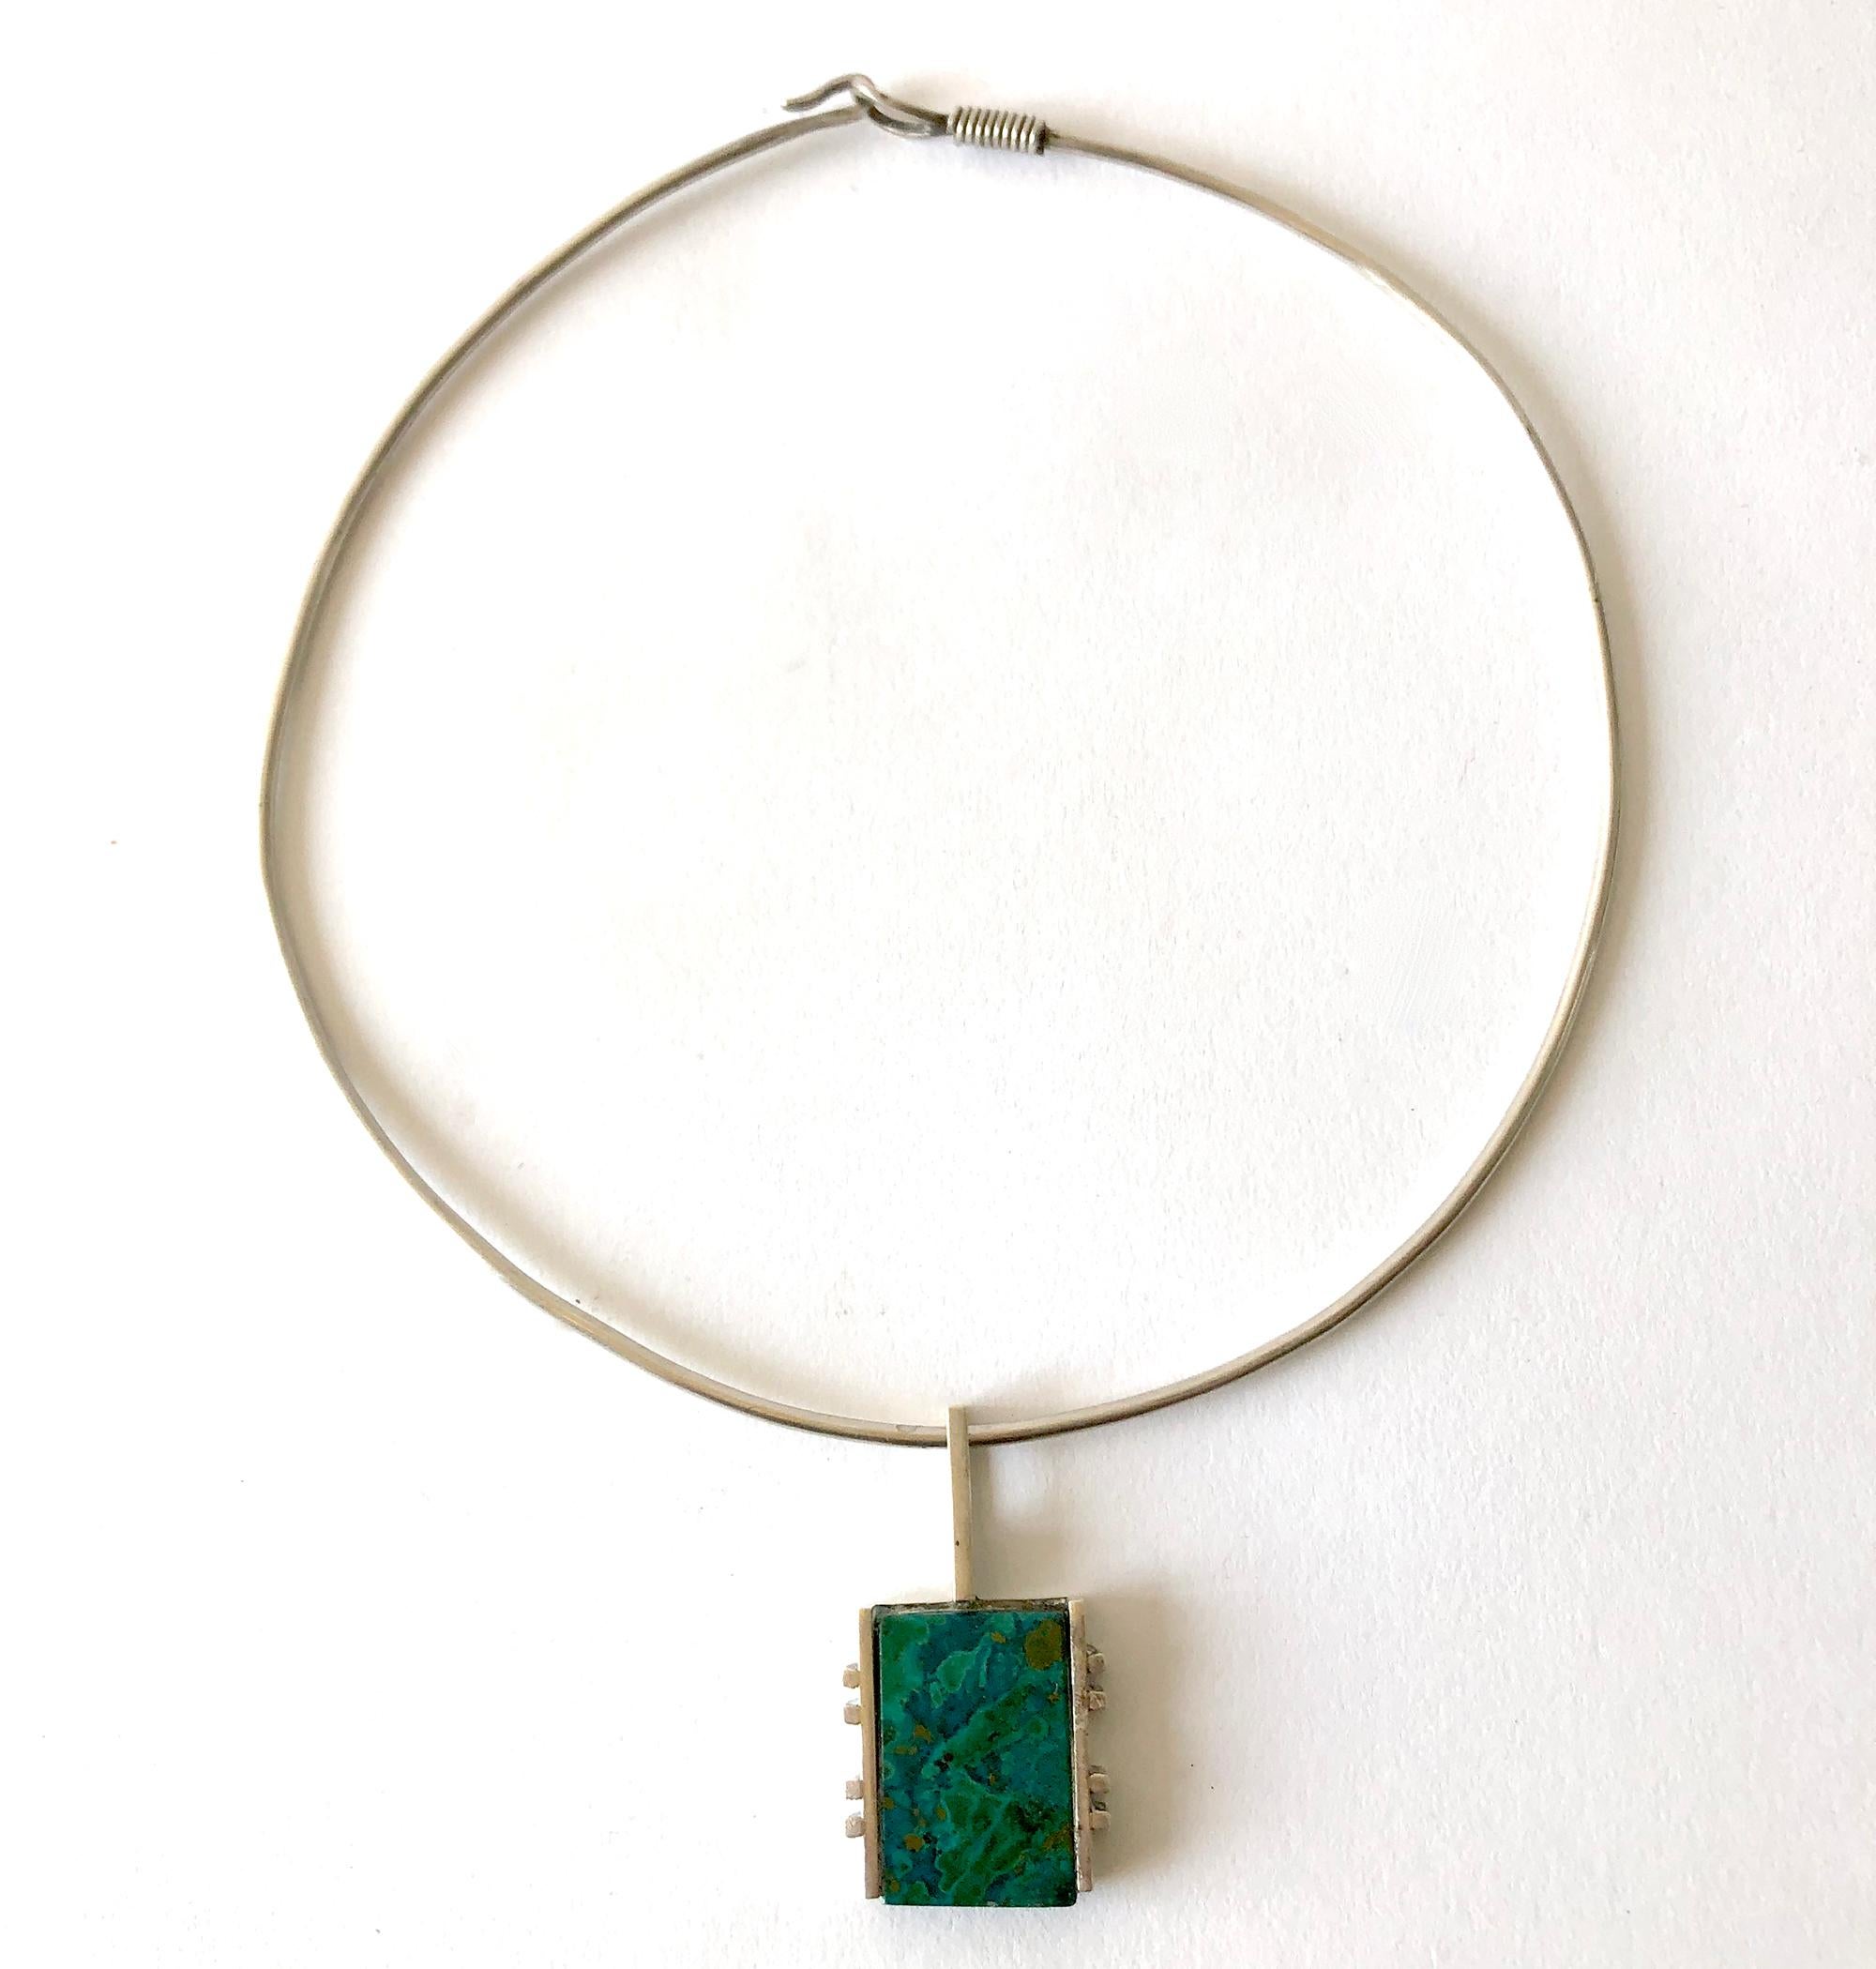 Sterling silver and malachite pendant necklace created by Graziella Laffi of Peru. Necklace choker measures 18